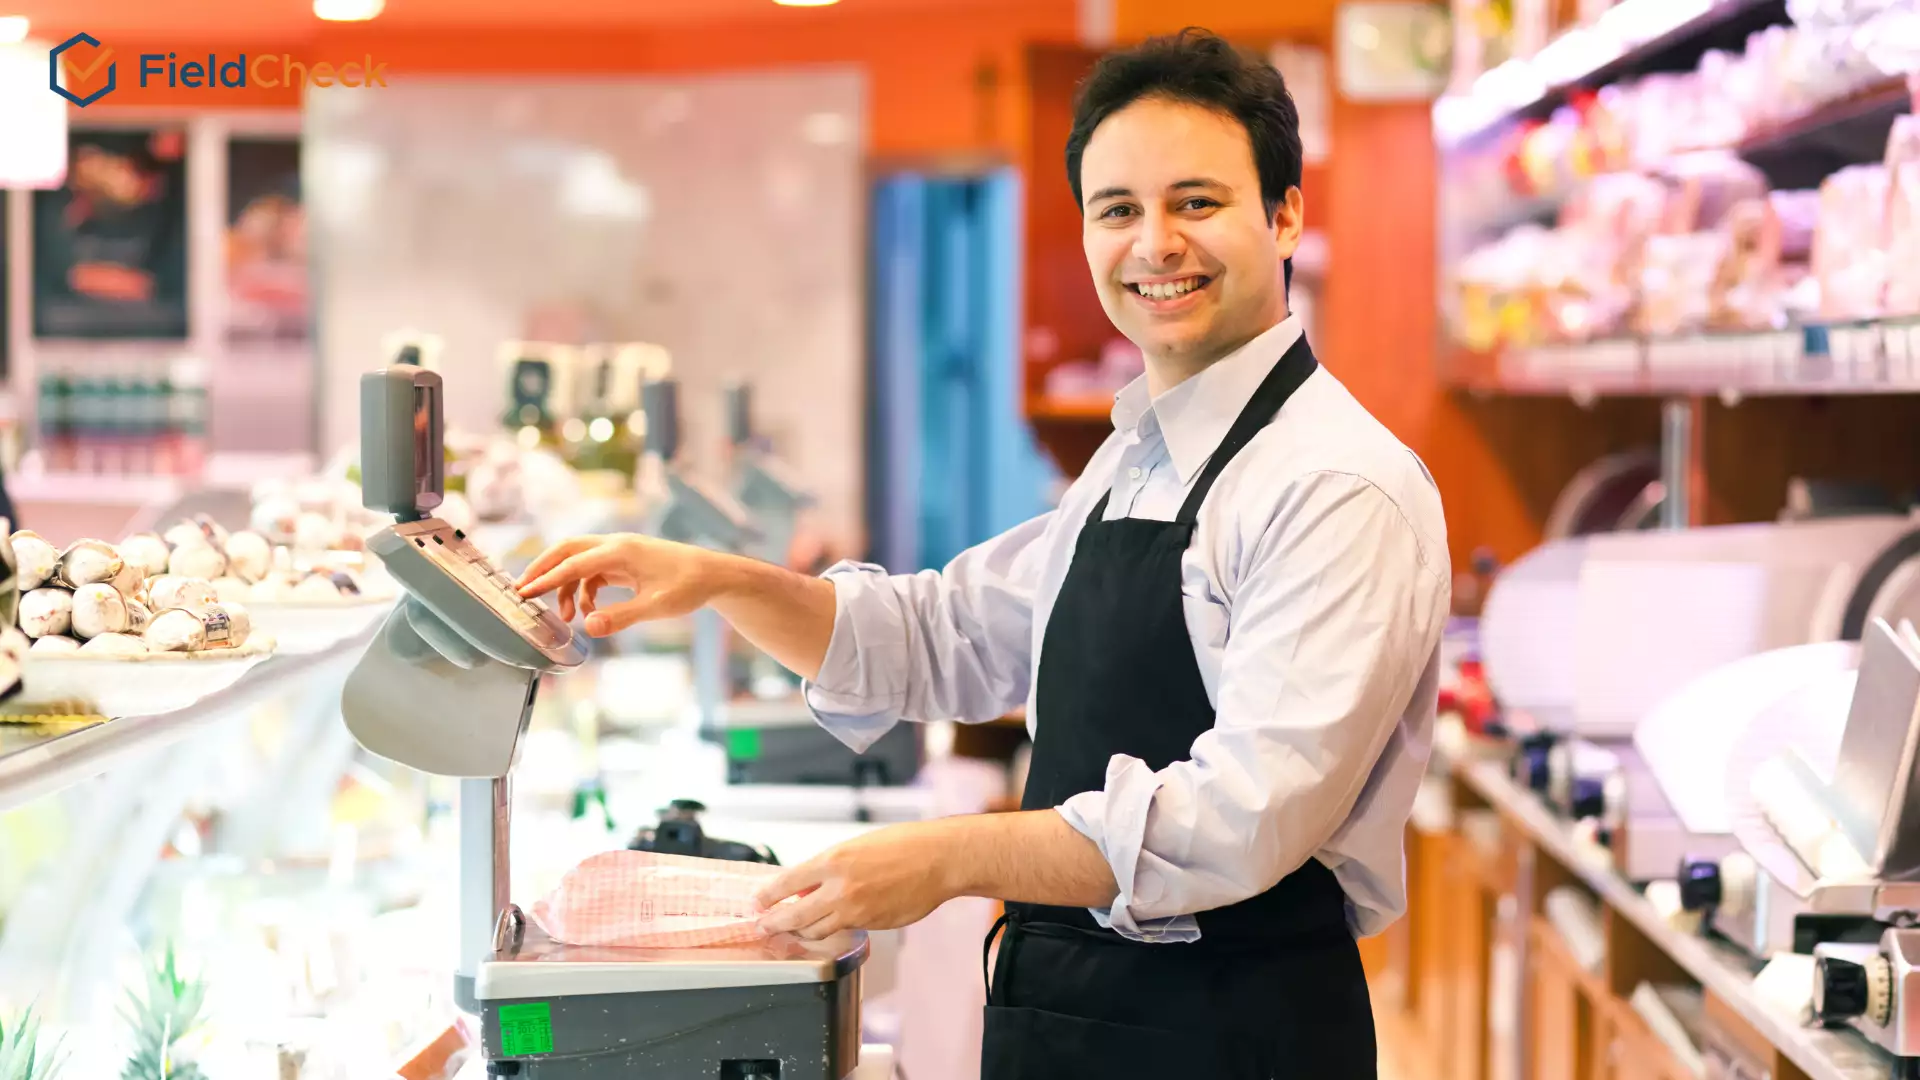 A Simple Way To Manage A Food Chain Store